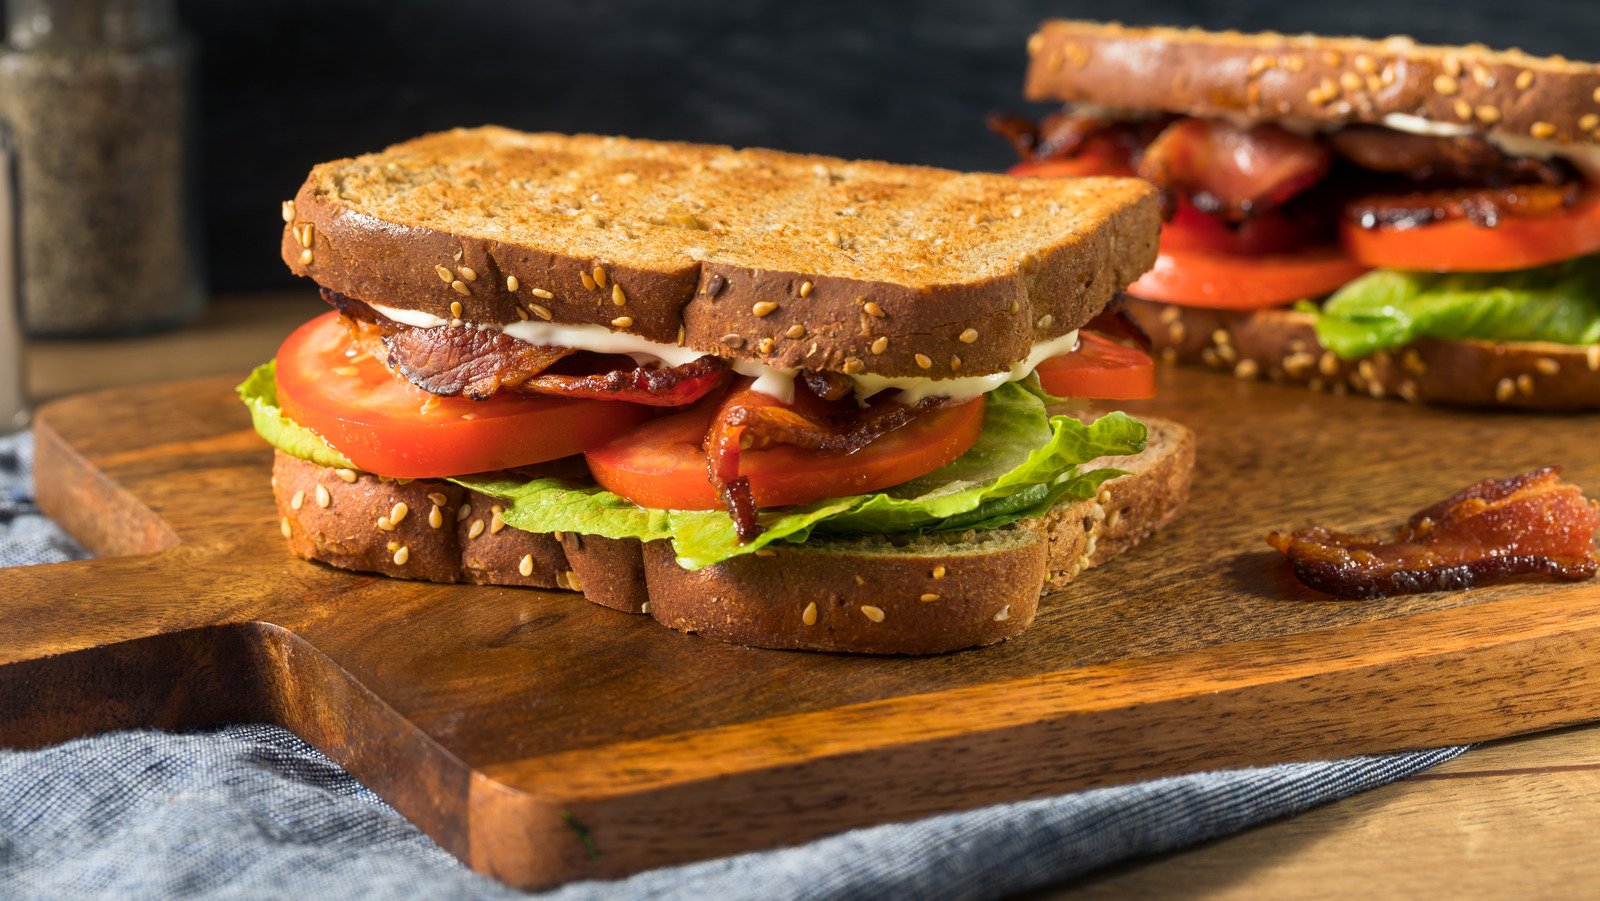 Why You Need To Avoid Frying Bacon For BLTs